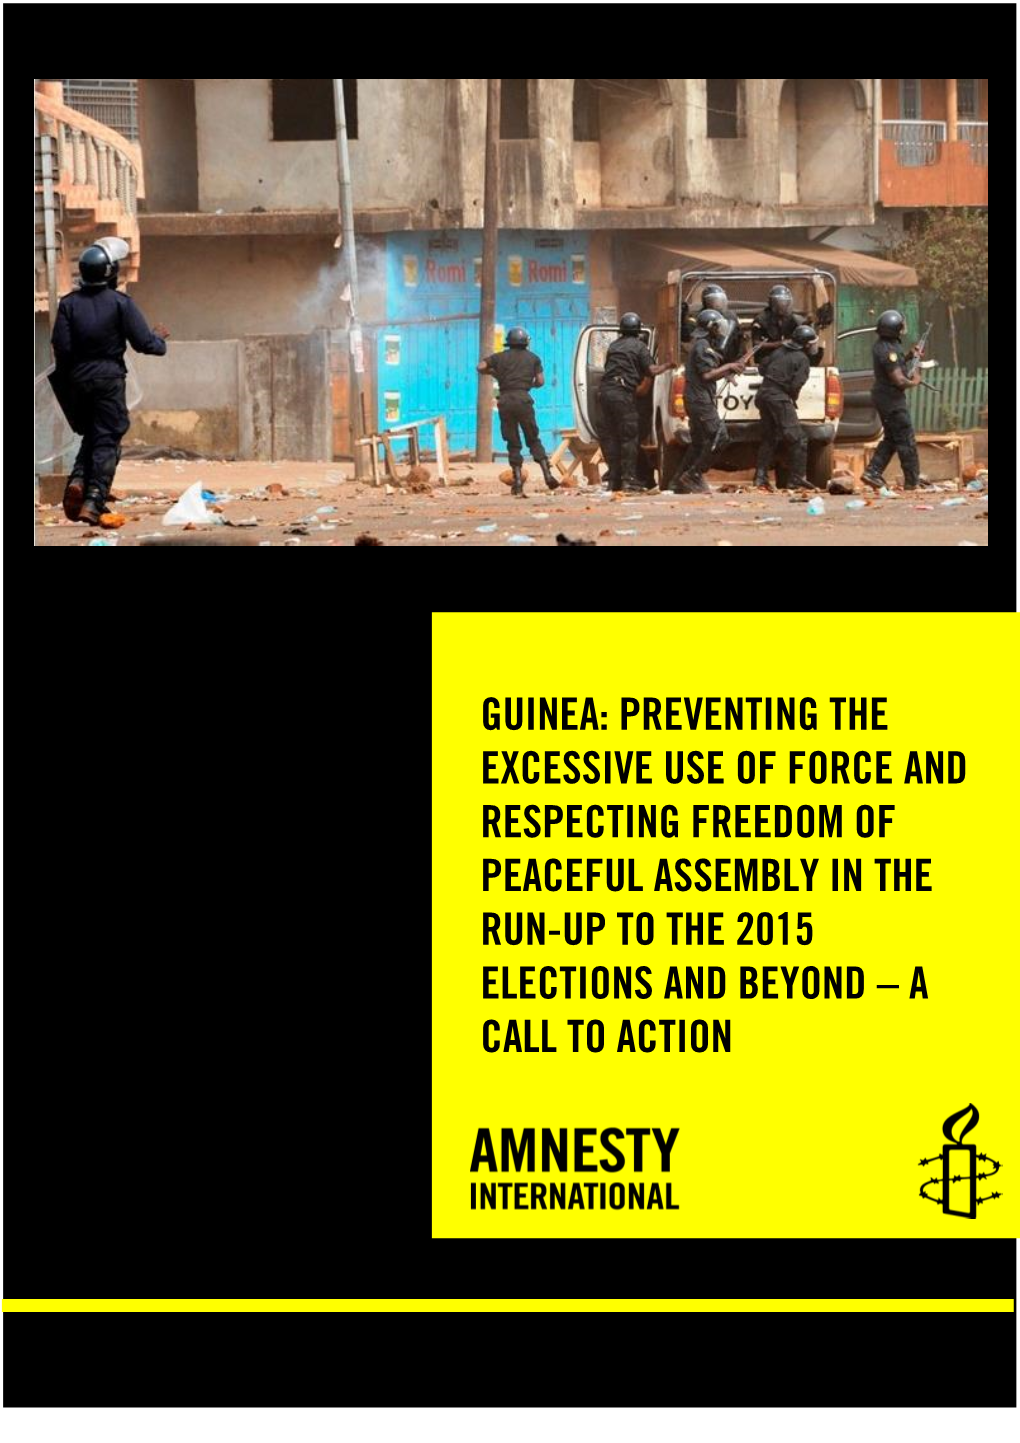 Guinea: Preventing the Excessive Use of Force and Respecting Freedom of Peaceful Assembly in the Run-Up to the 2015 Elections and Beyond – a Call to Action